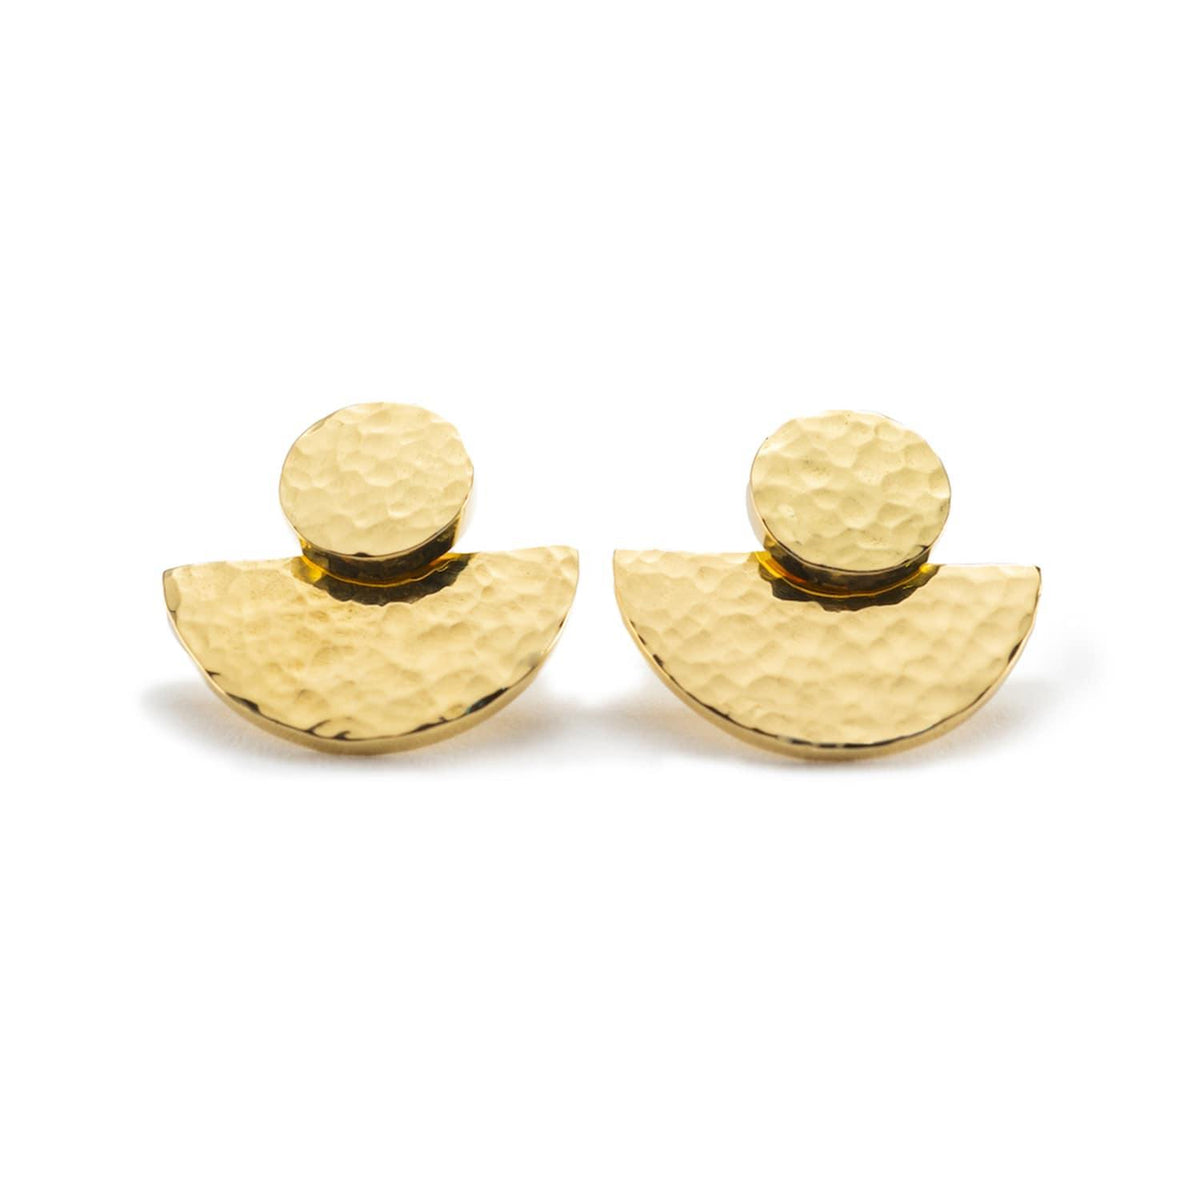 Contemporary gold plated hammered textured earrings handmade from brass for women